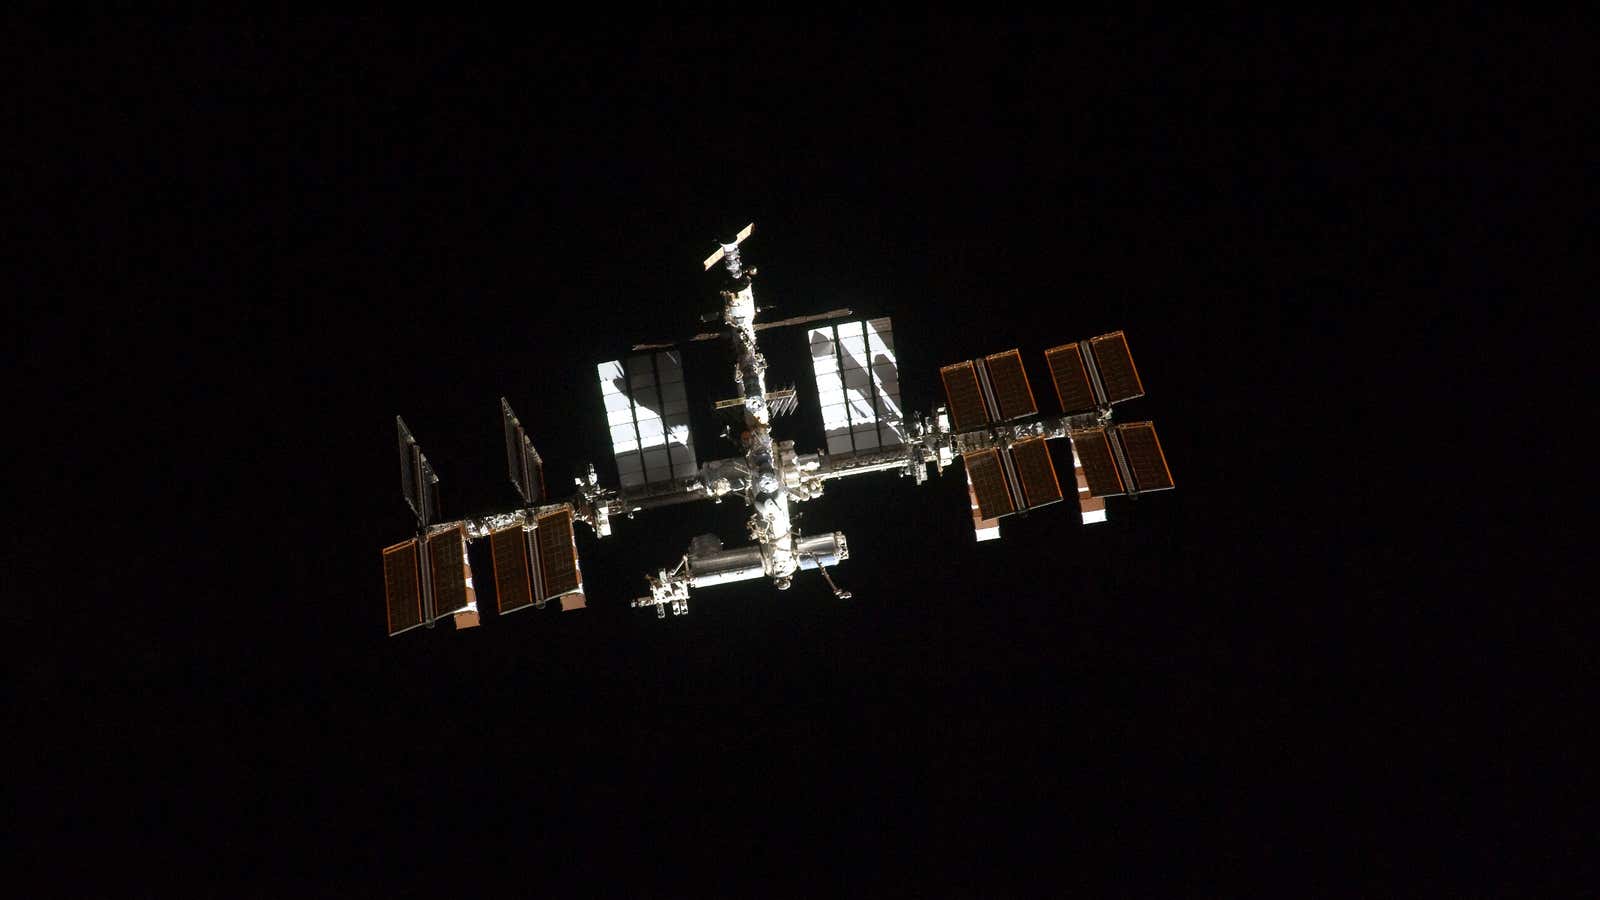 The International Space Station: So close, yet so far away.